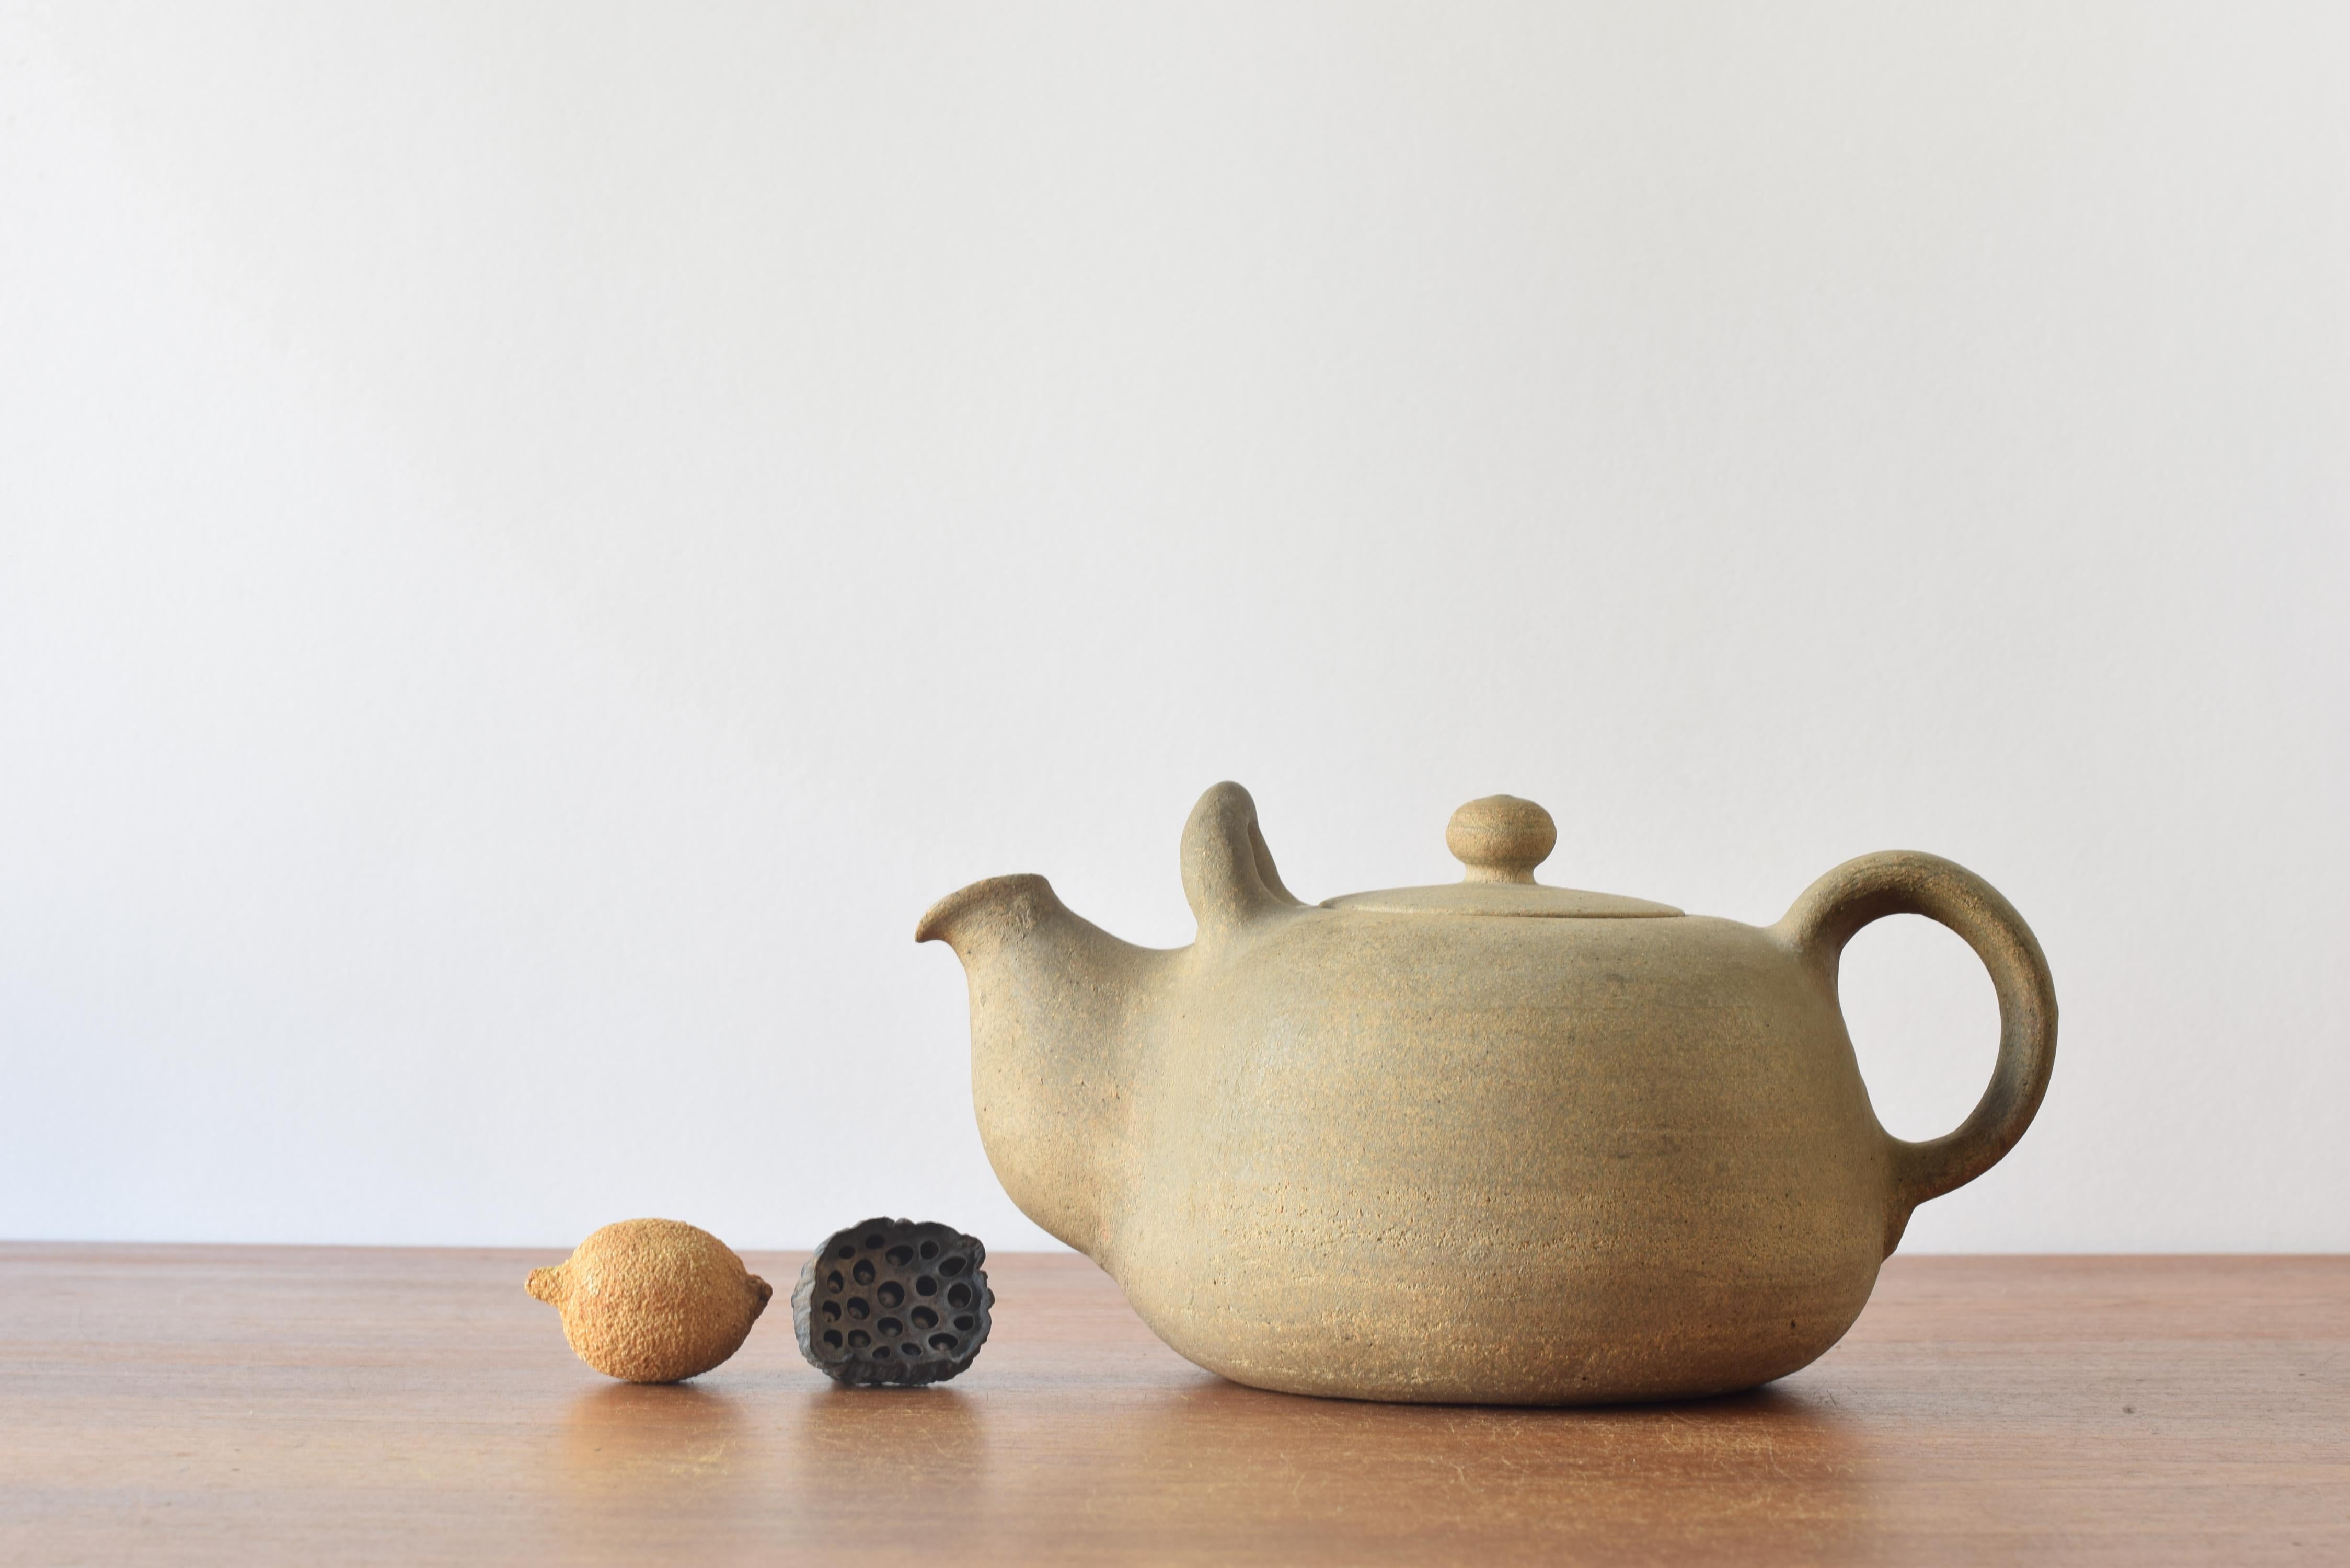 Decorative vintage Danish huge teapot by Nils Kähler for the ceramic workshop Herman August Kähler (HAK). Made ca. 1950s. This is a rare piece.

The budded shape with soft curves plays well with the material clay which here shows itself in